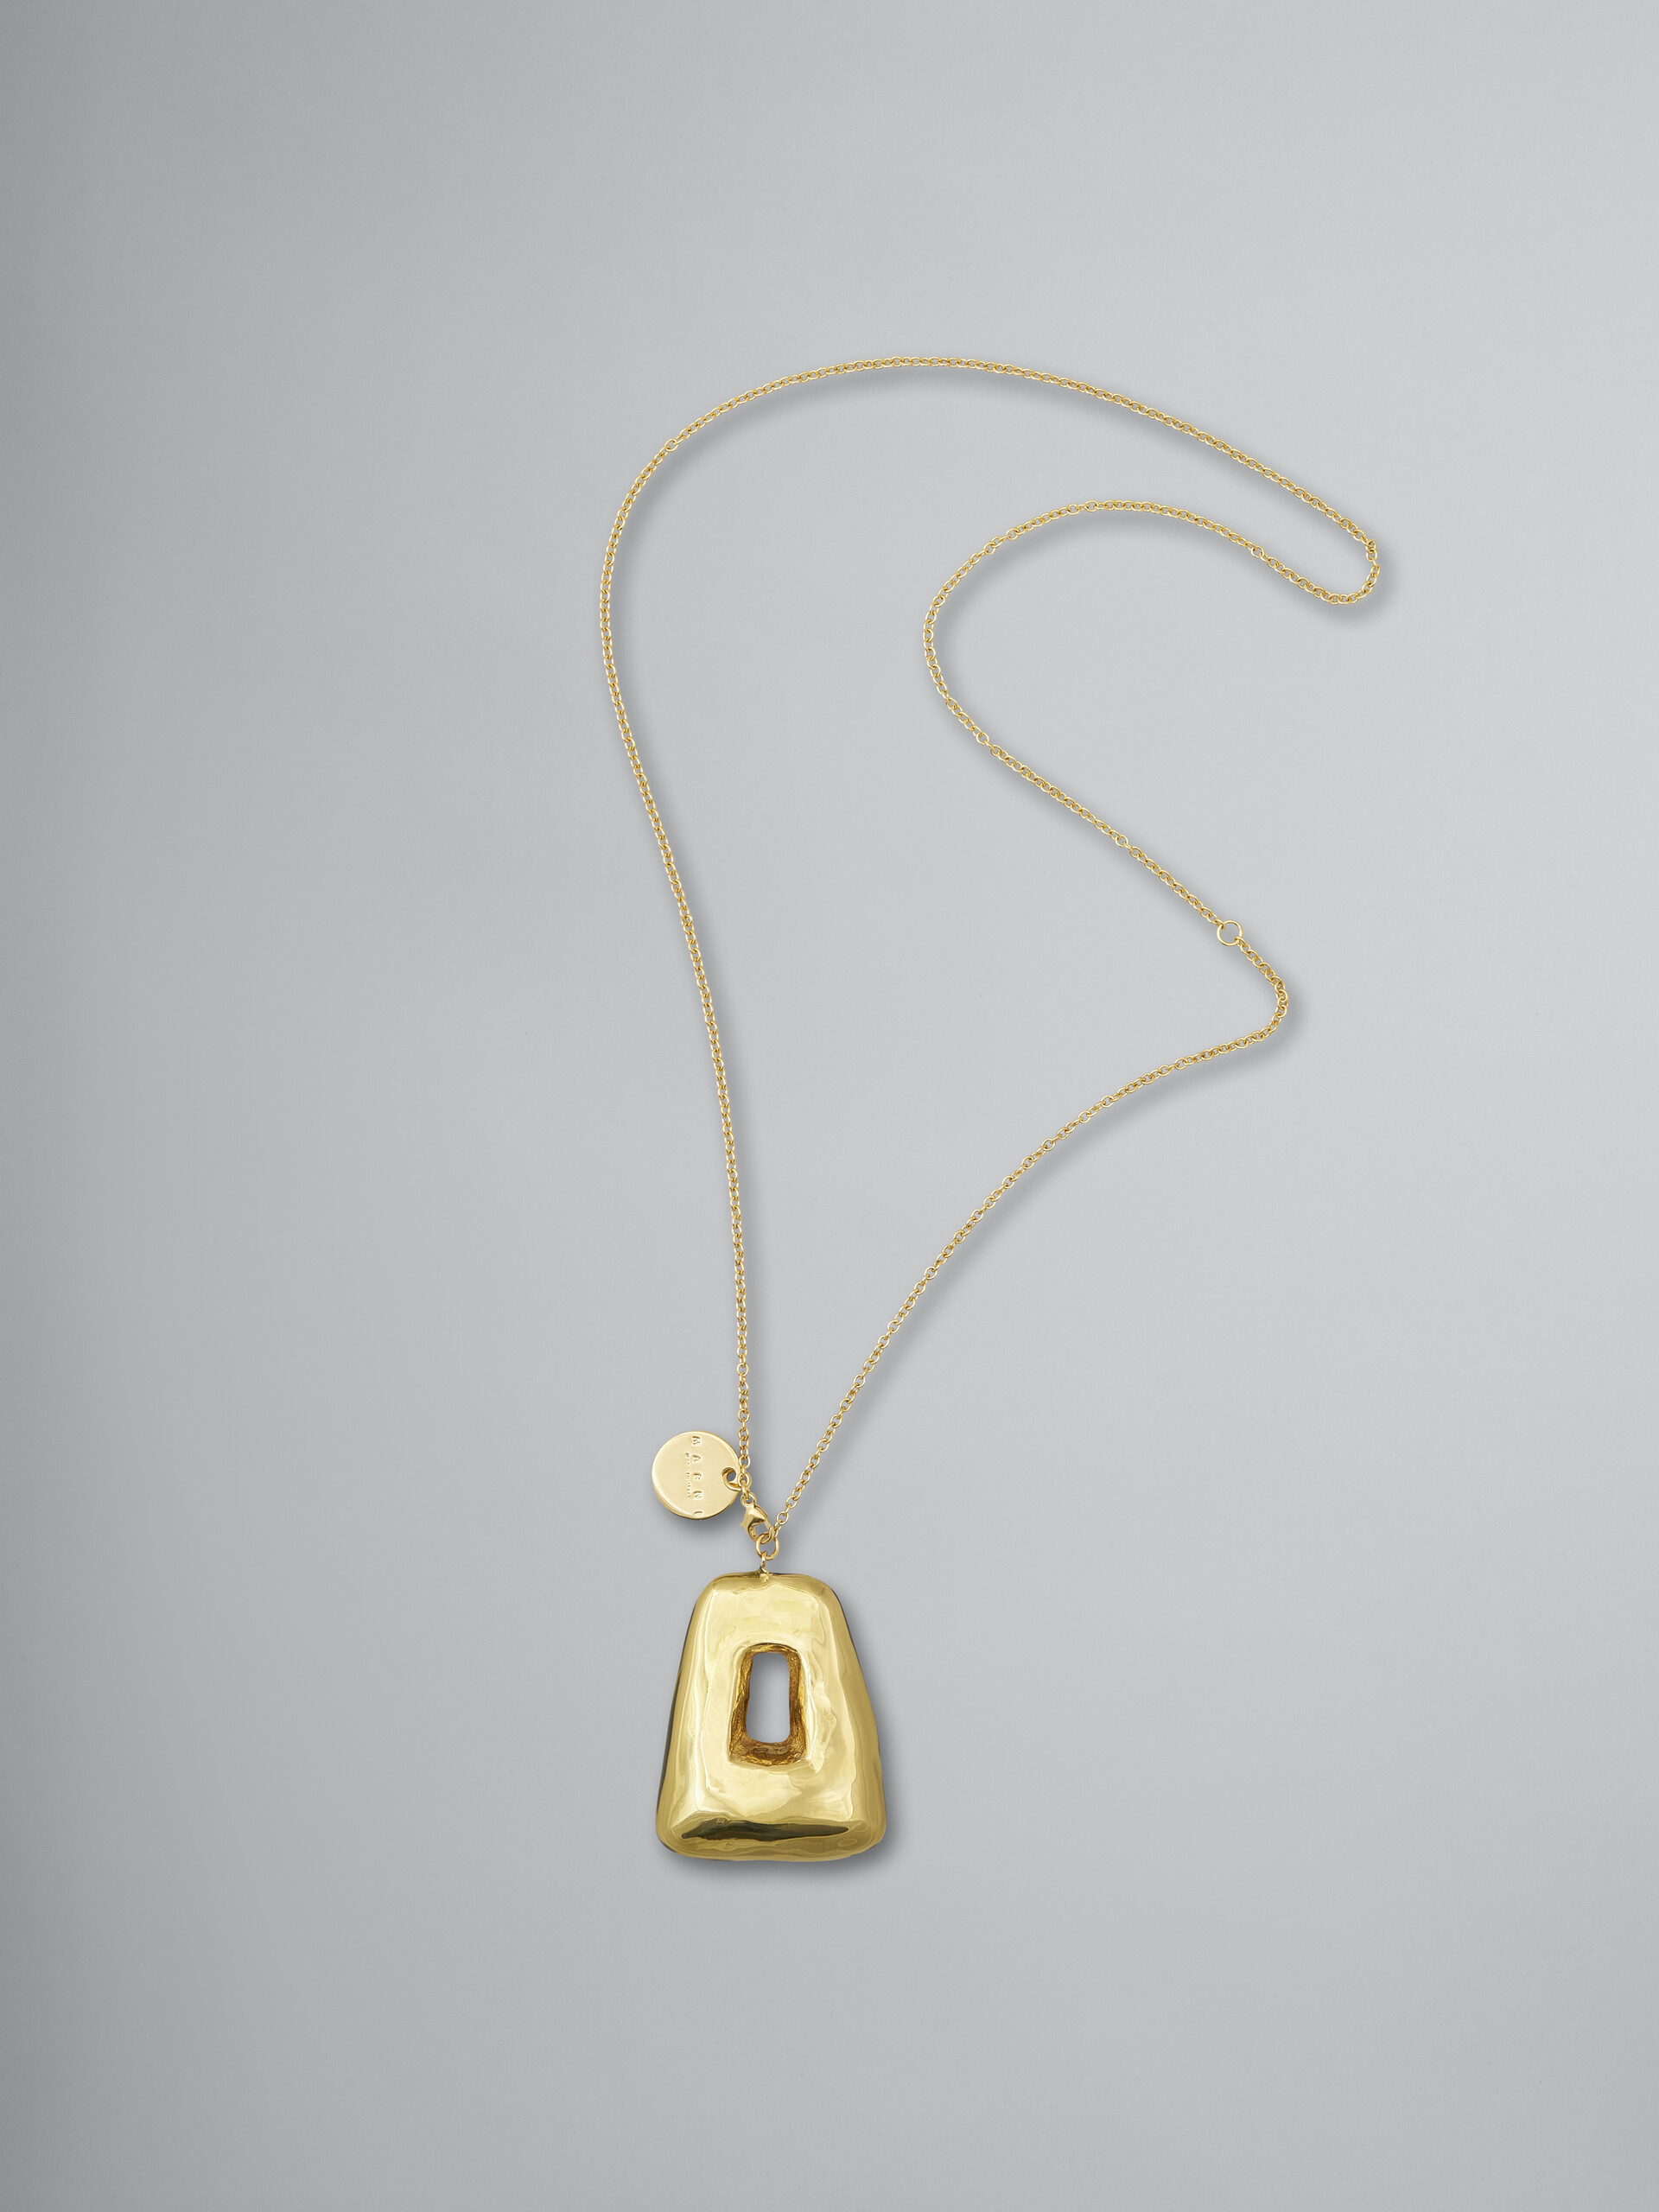 Gold-tone metal TRAPEZE necklace with transparent enamel-covered pendant - Necklaces - Image 1